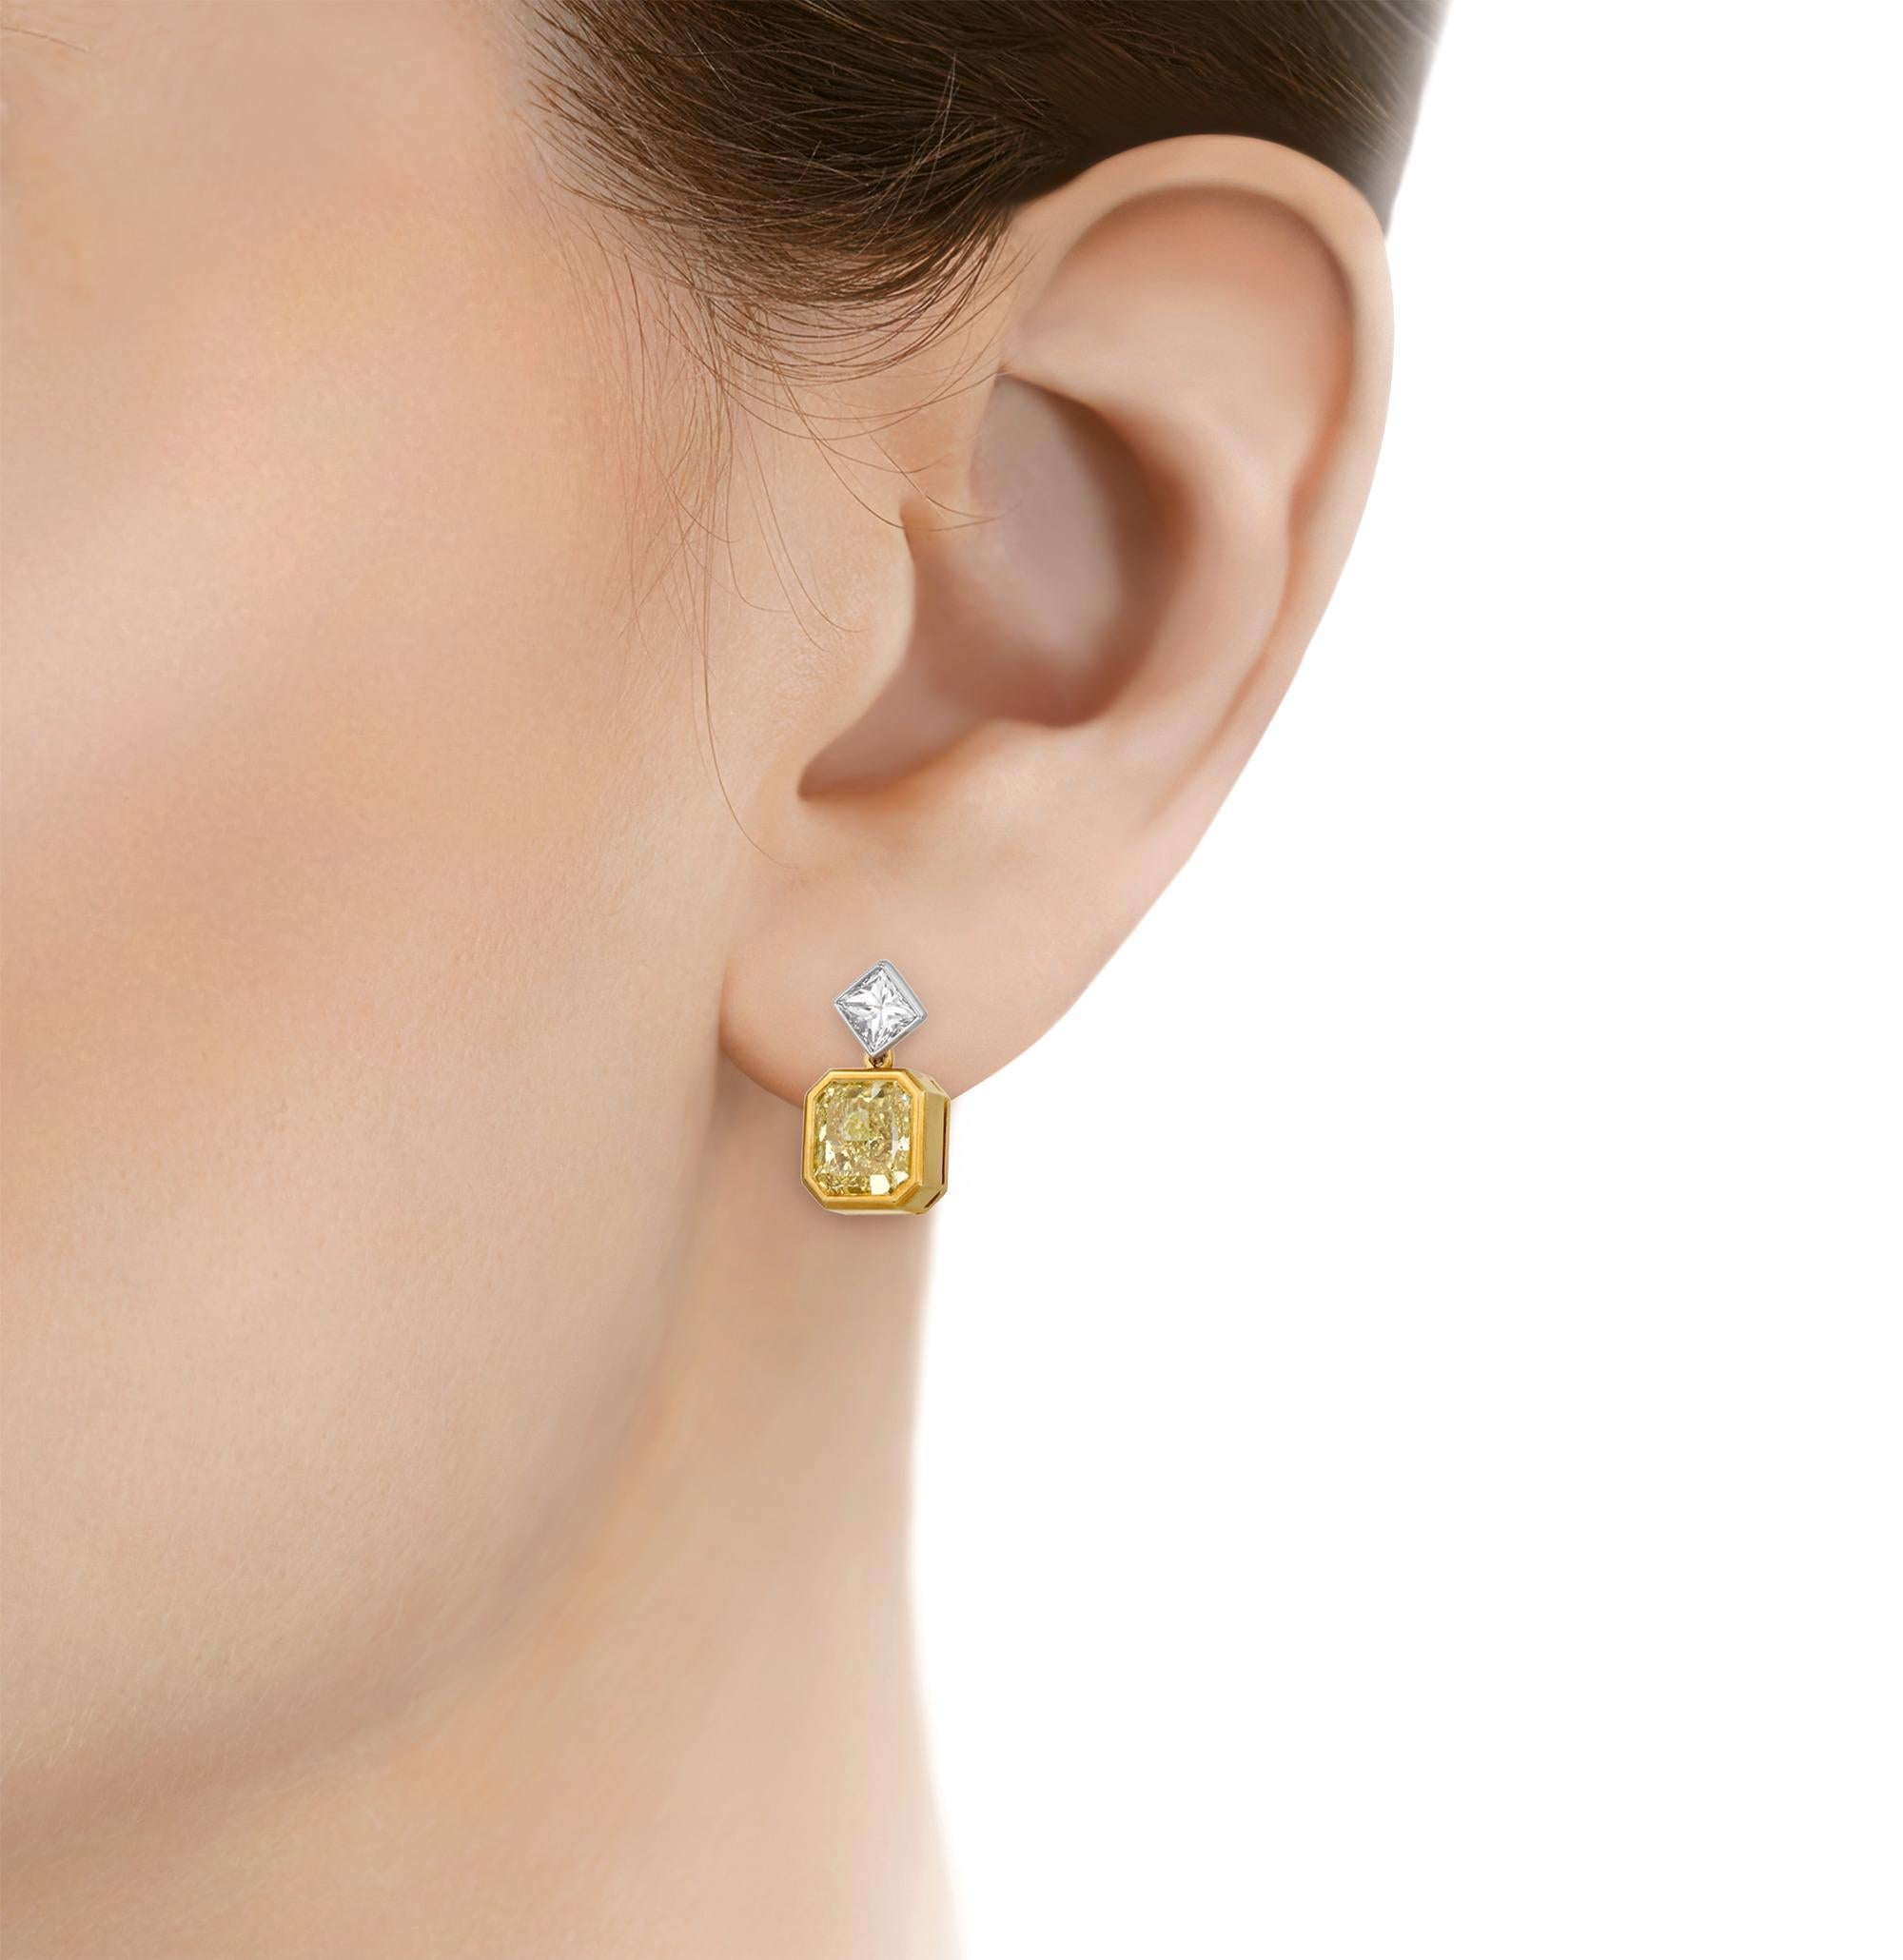 This exquisite pair of dangle earrings features two fancy yellow diamonds with VVS1-VVS2 clarity totaling 4.47 carats. Their radiant cut shines in a refined 18K yellow gold bezel setting. The sun-brilliant hue of the yellow diamonds is perfectly